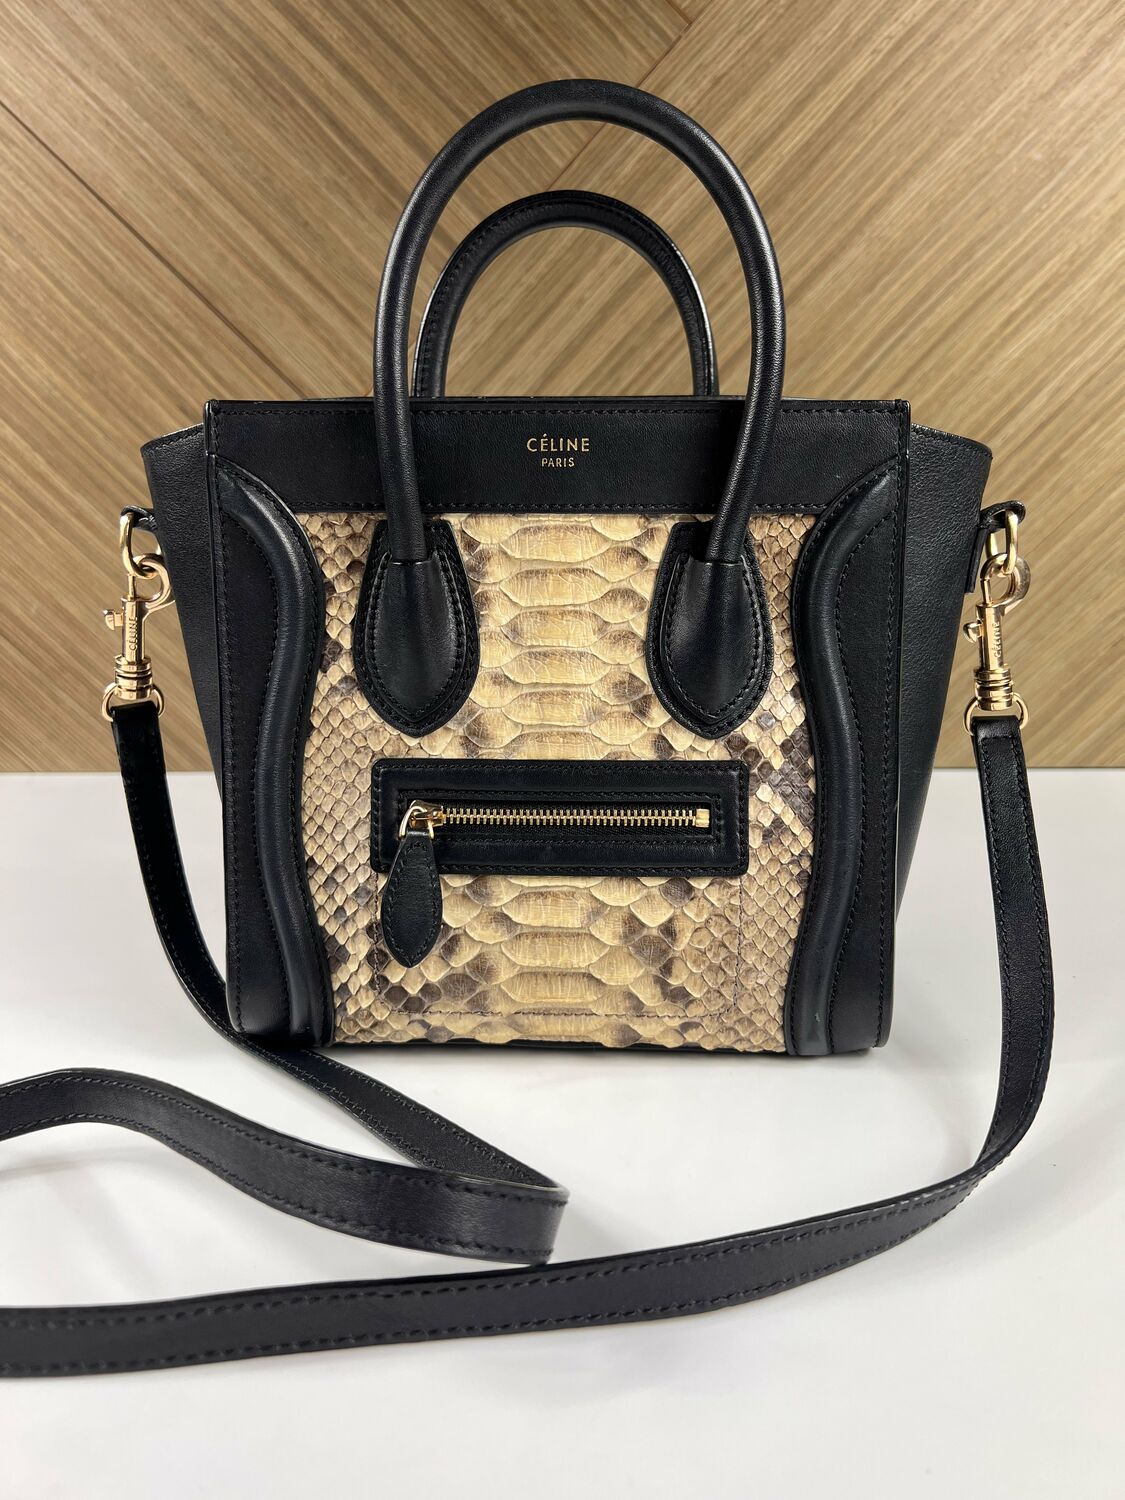 Exotic leather Cross-body Handbag Celine - One size, buy pre-owned at ...